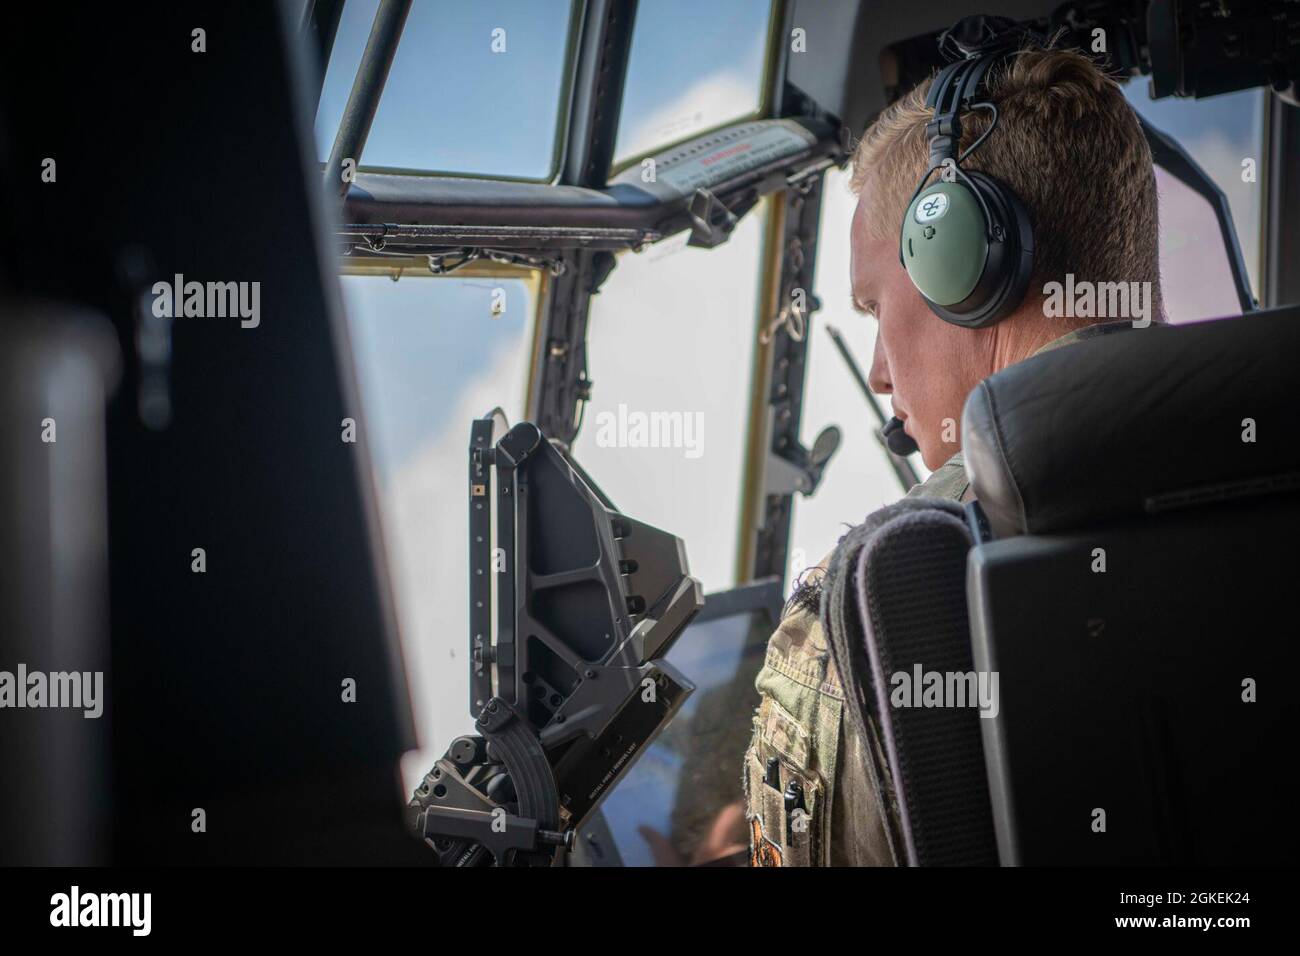 U.S. Air Force Capt. Jordan Webb, an AC-130J Ghostrider pilot assigned to the 4th Special Operations Squadron, looks out the window as a 105mm cannon is fired from an AC-130J Ghostrider, Eglin Range Complex, Florida, March 31, 2021. The 492nd Special Operations Training Group is the Air Force Special Operations Command's formal school for the AC-130J Ghostrider and MC-130H Talon II. They are responsible for assessing, educating and professionally developing SOF Airmen and rapidly developing innovative courses and technologies to meet emerging AFSOC requirements. Stock Photo